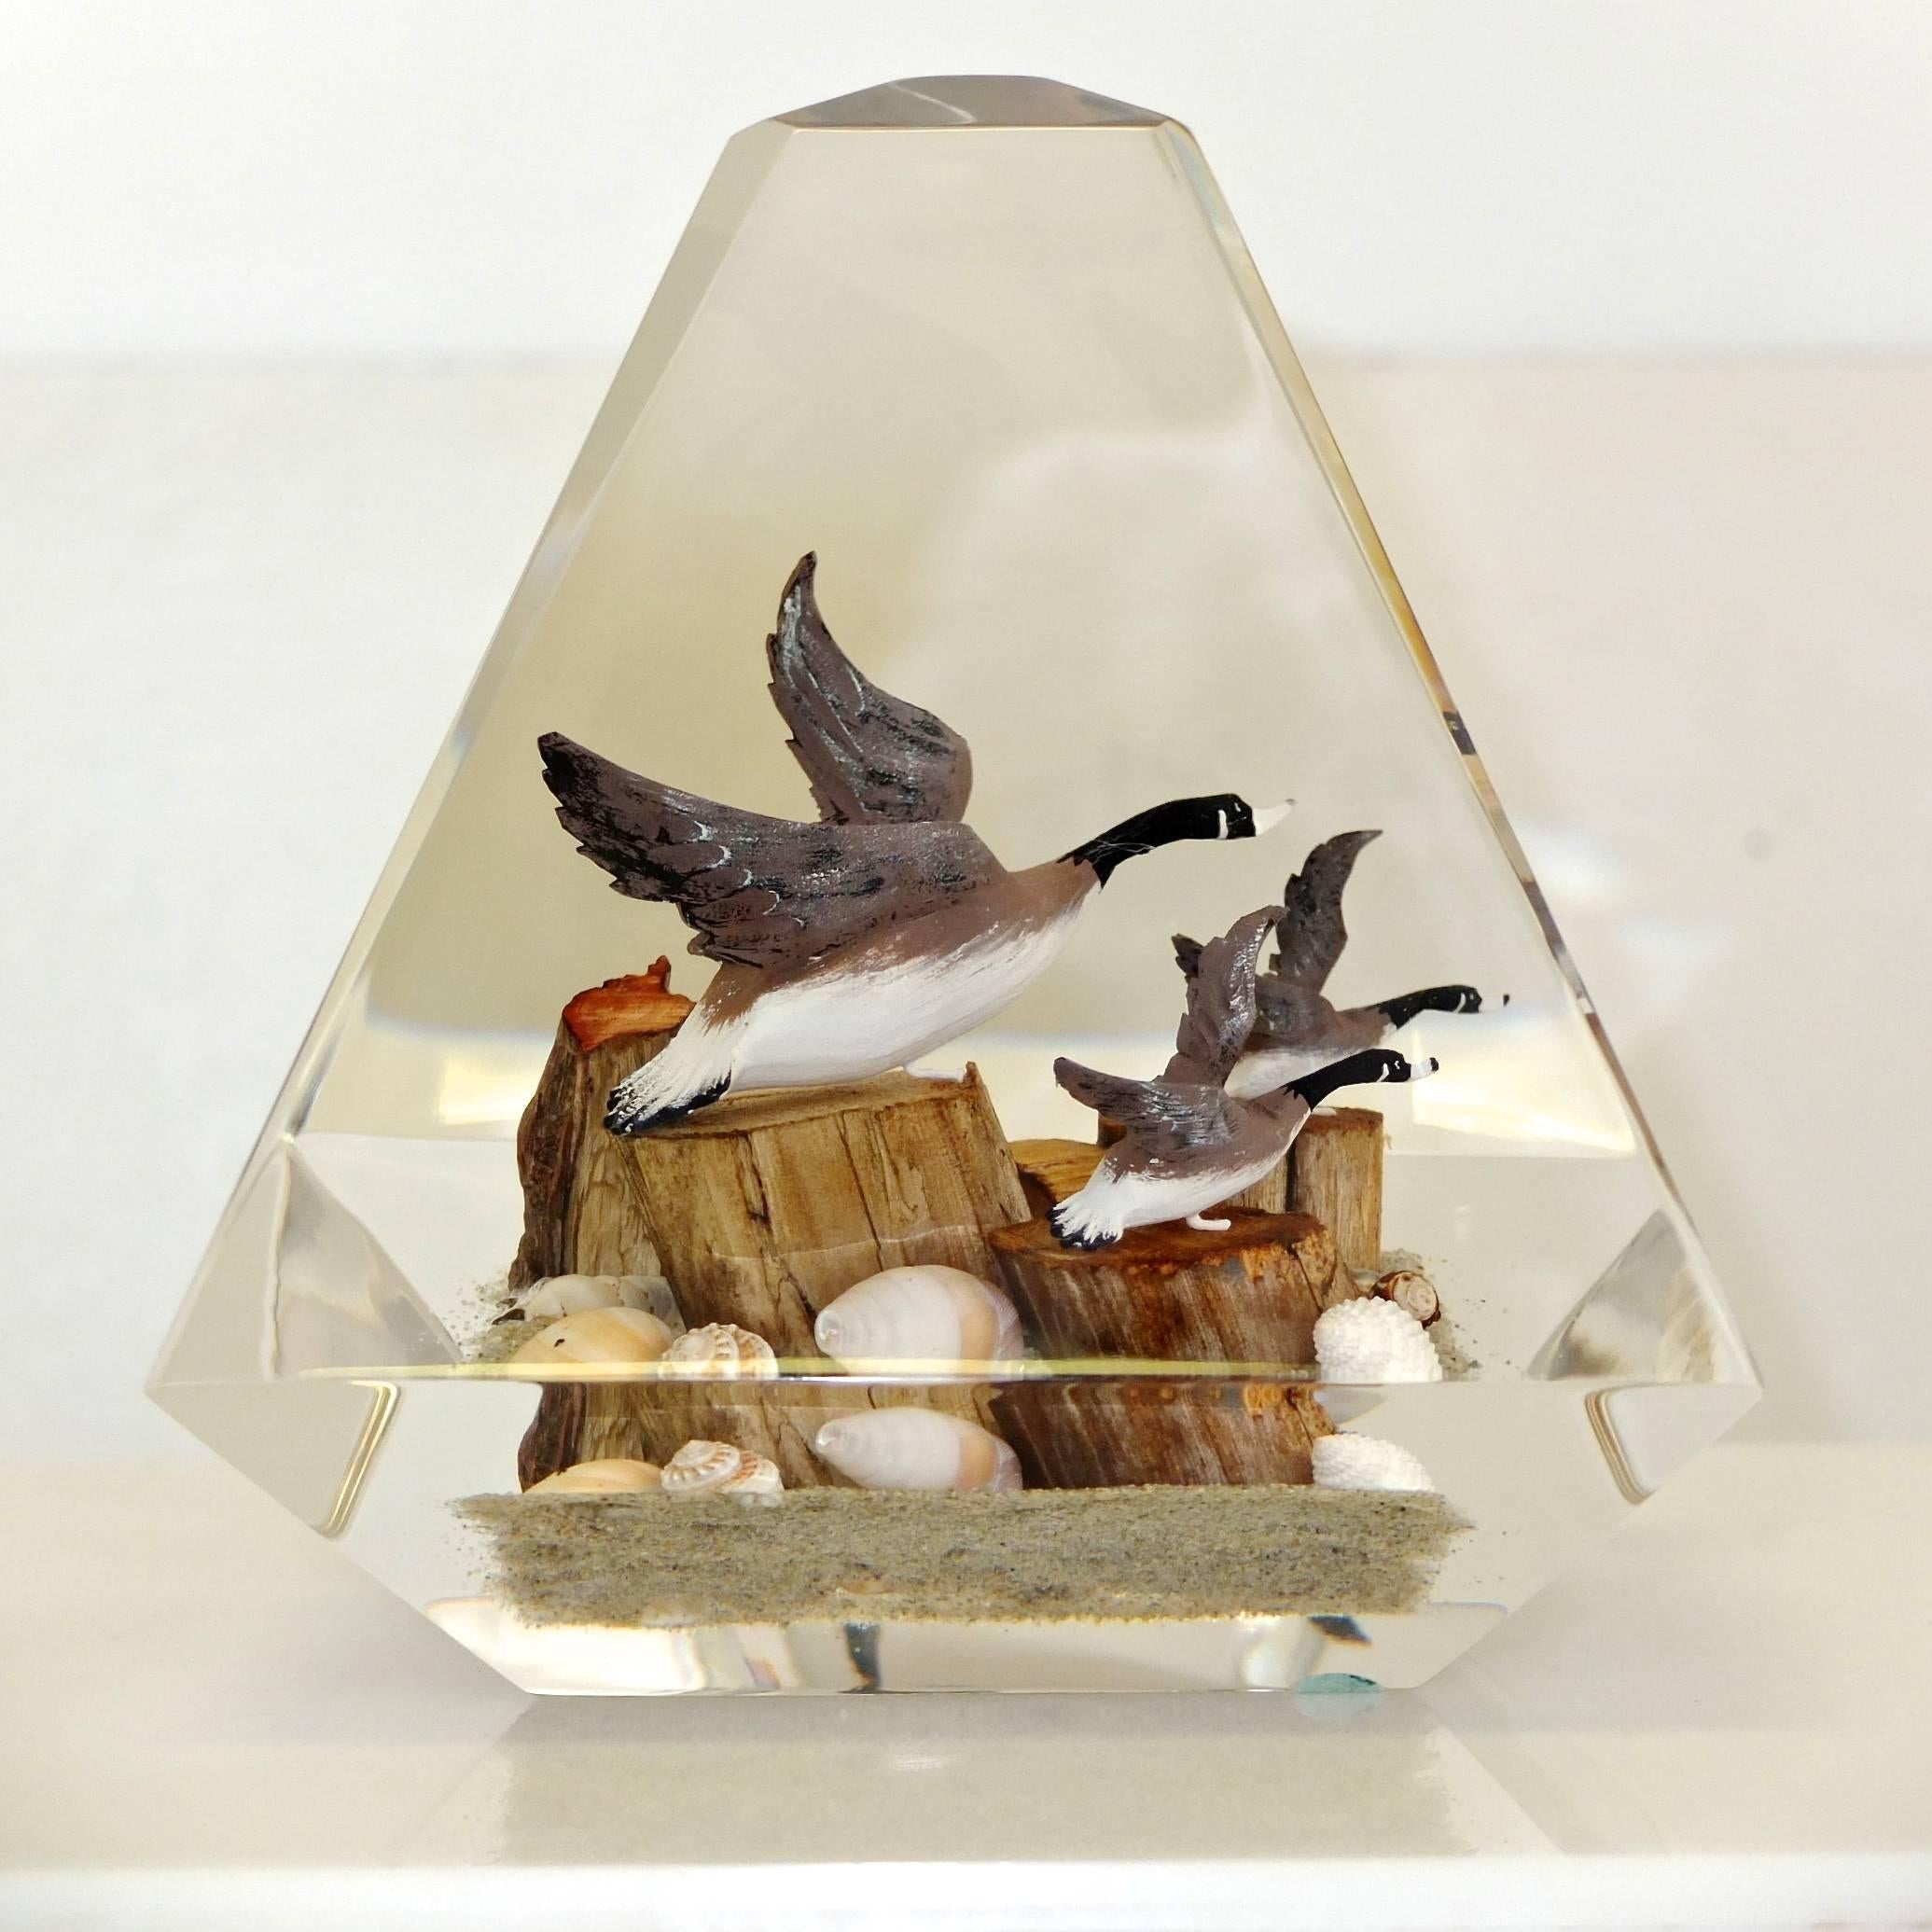 Immaculate and intensely clear obelisk-form sculpture of a wildlife scene with geese, ducks, driftwood, sea shells and pebbles encased in polished perspex.